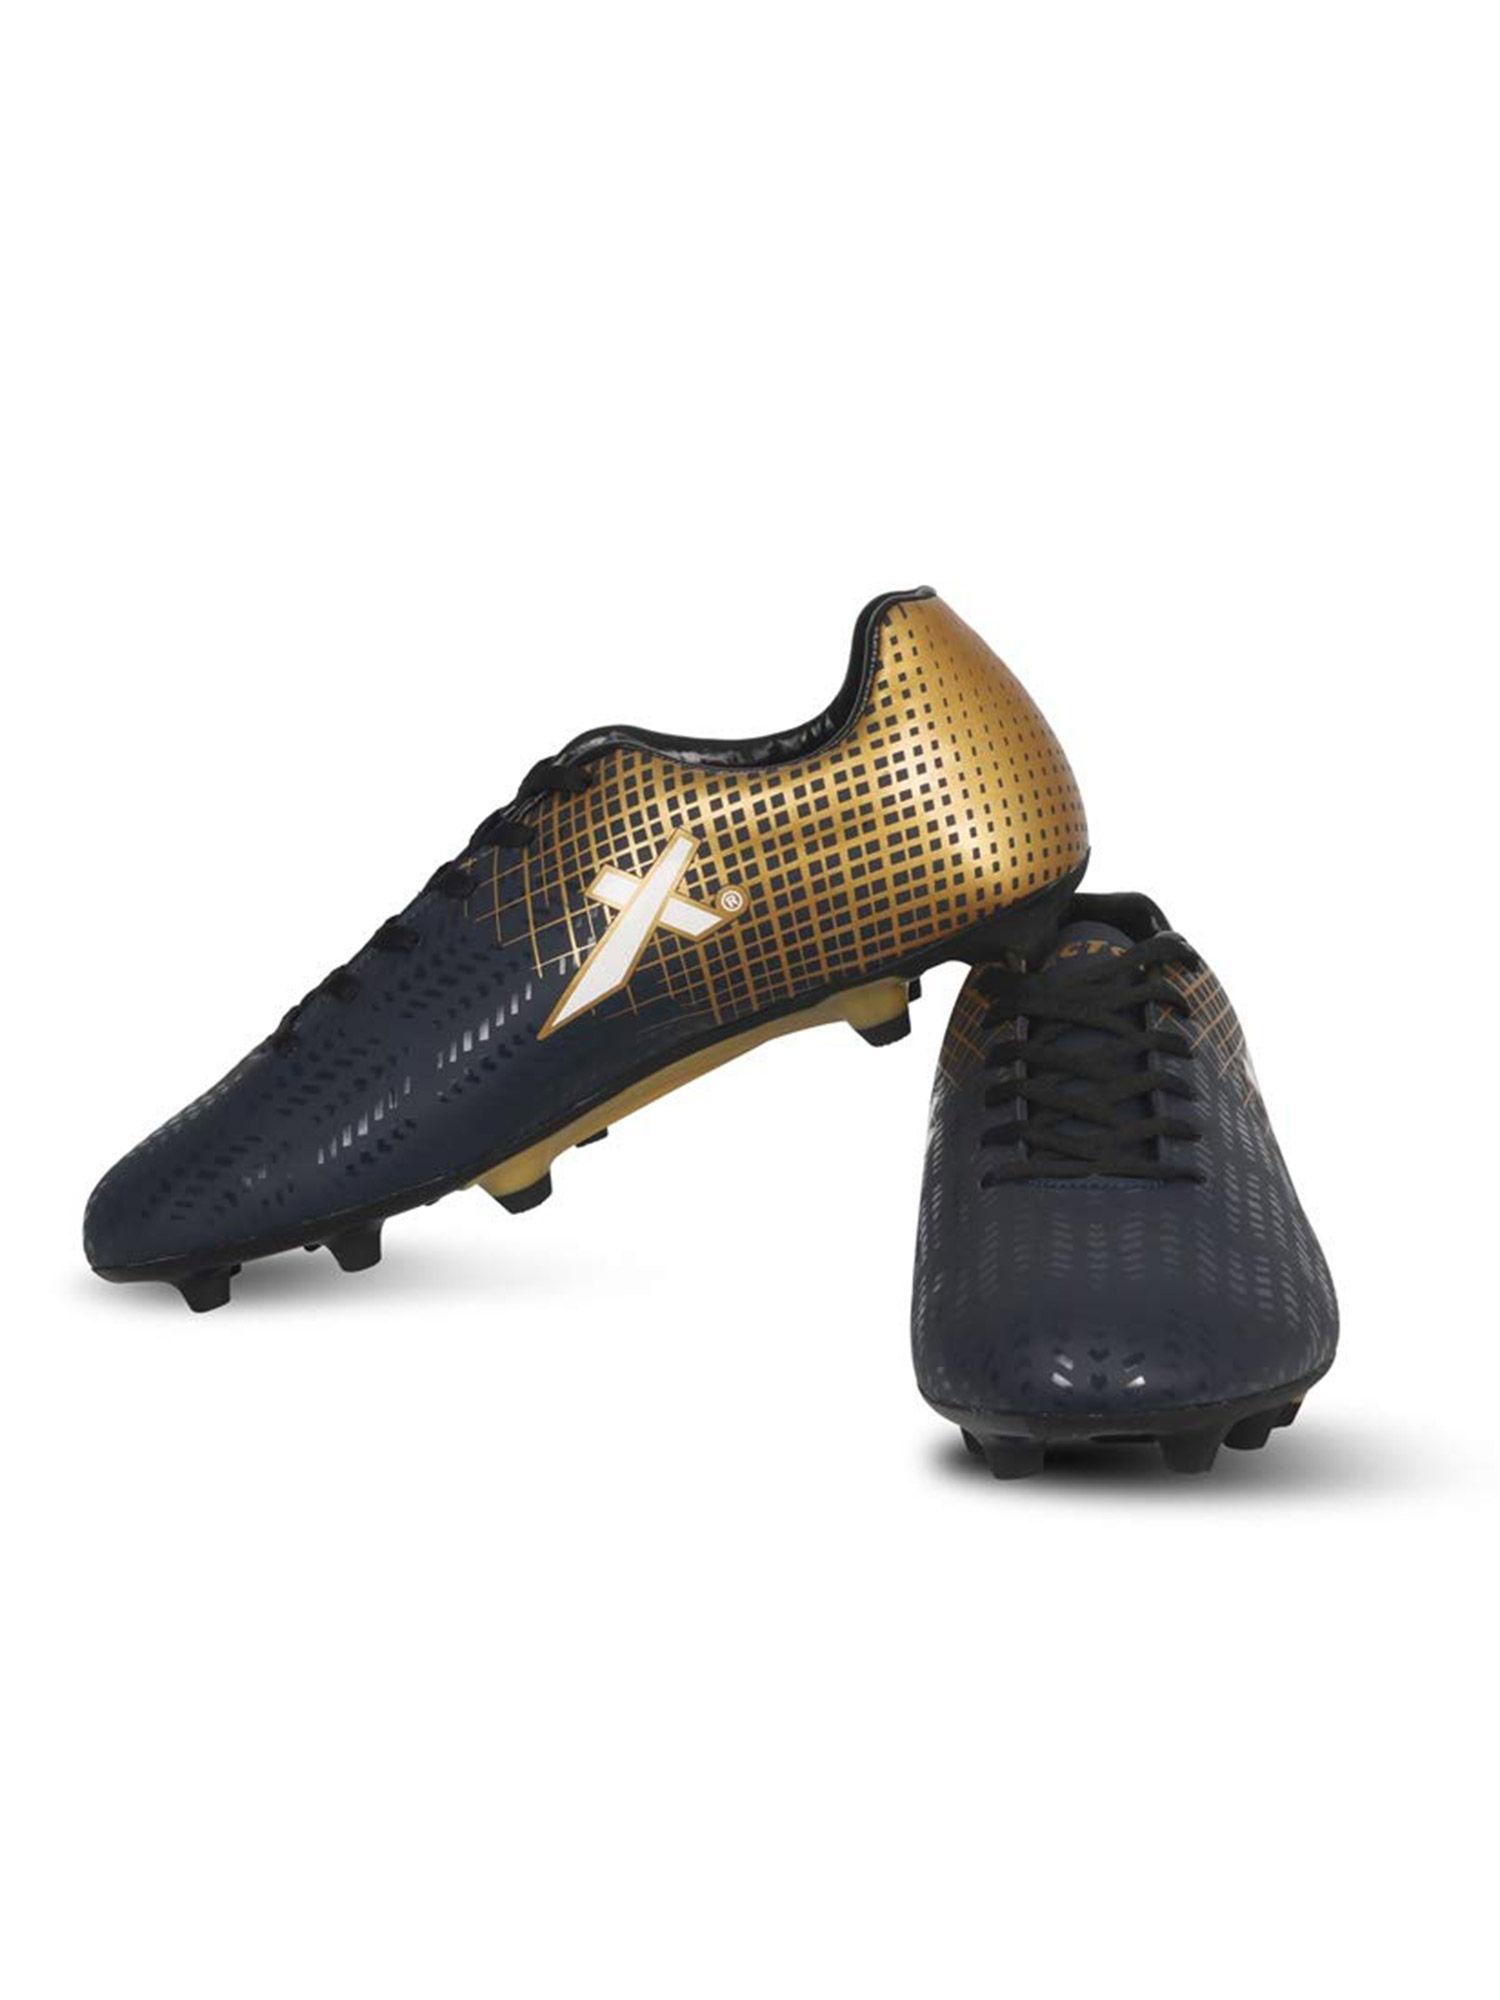 ozone football shoes for men - navy - gold